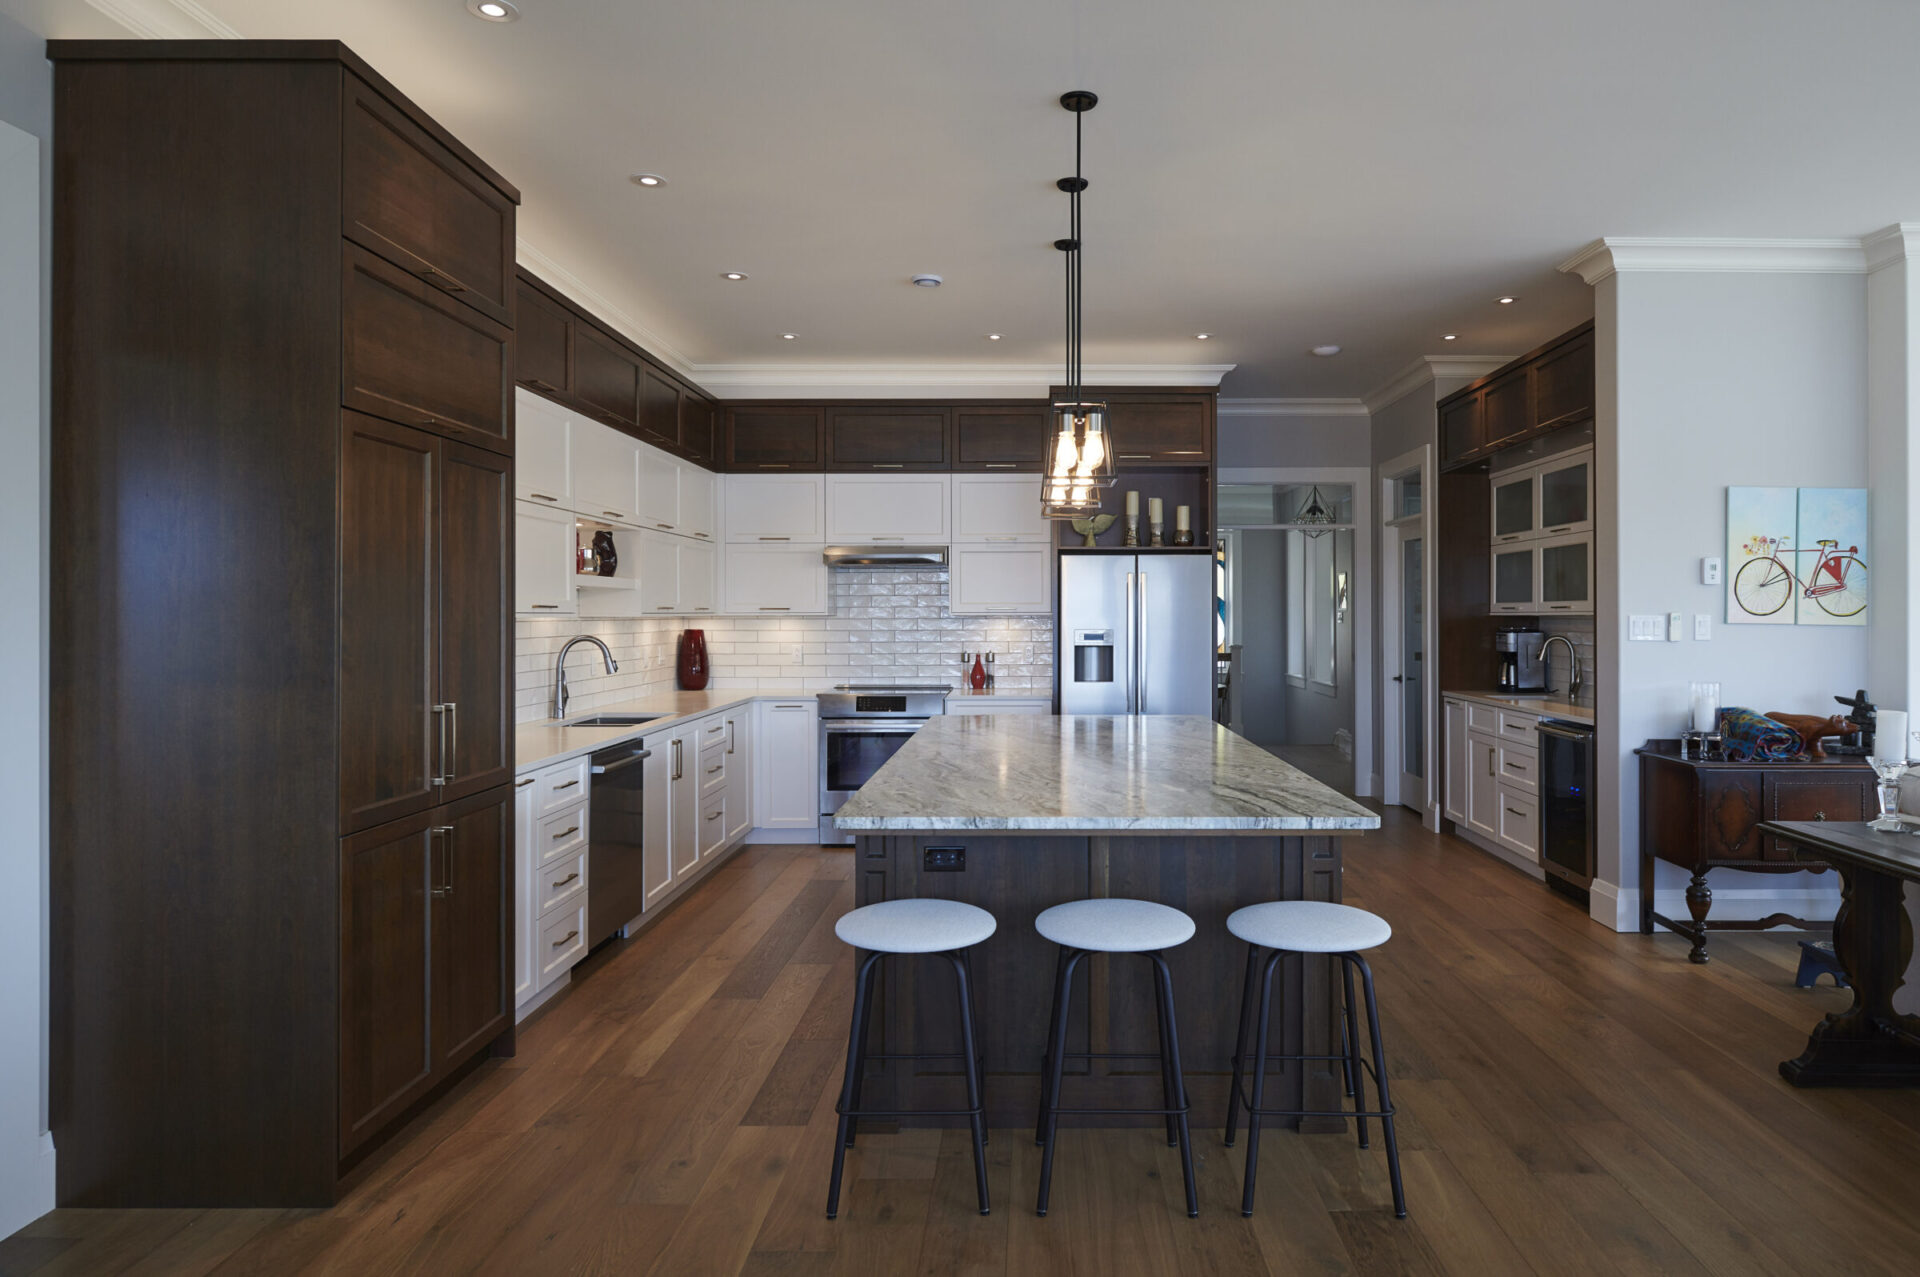 A spacious kitchen with white cabinetry, dark wood floor, a central island with seating, modern appliances, and elegant lighting fixtures.